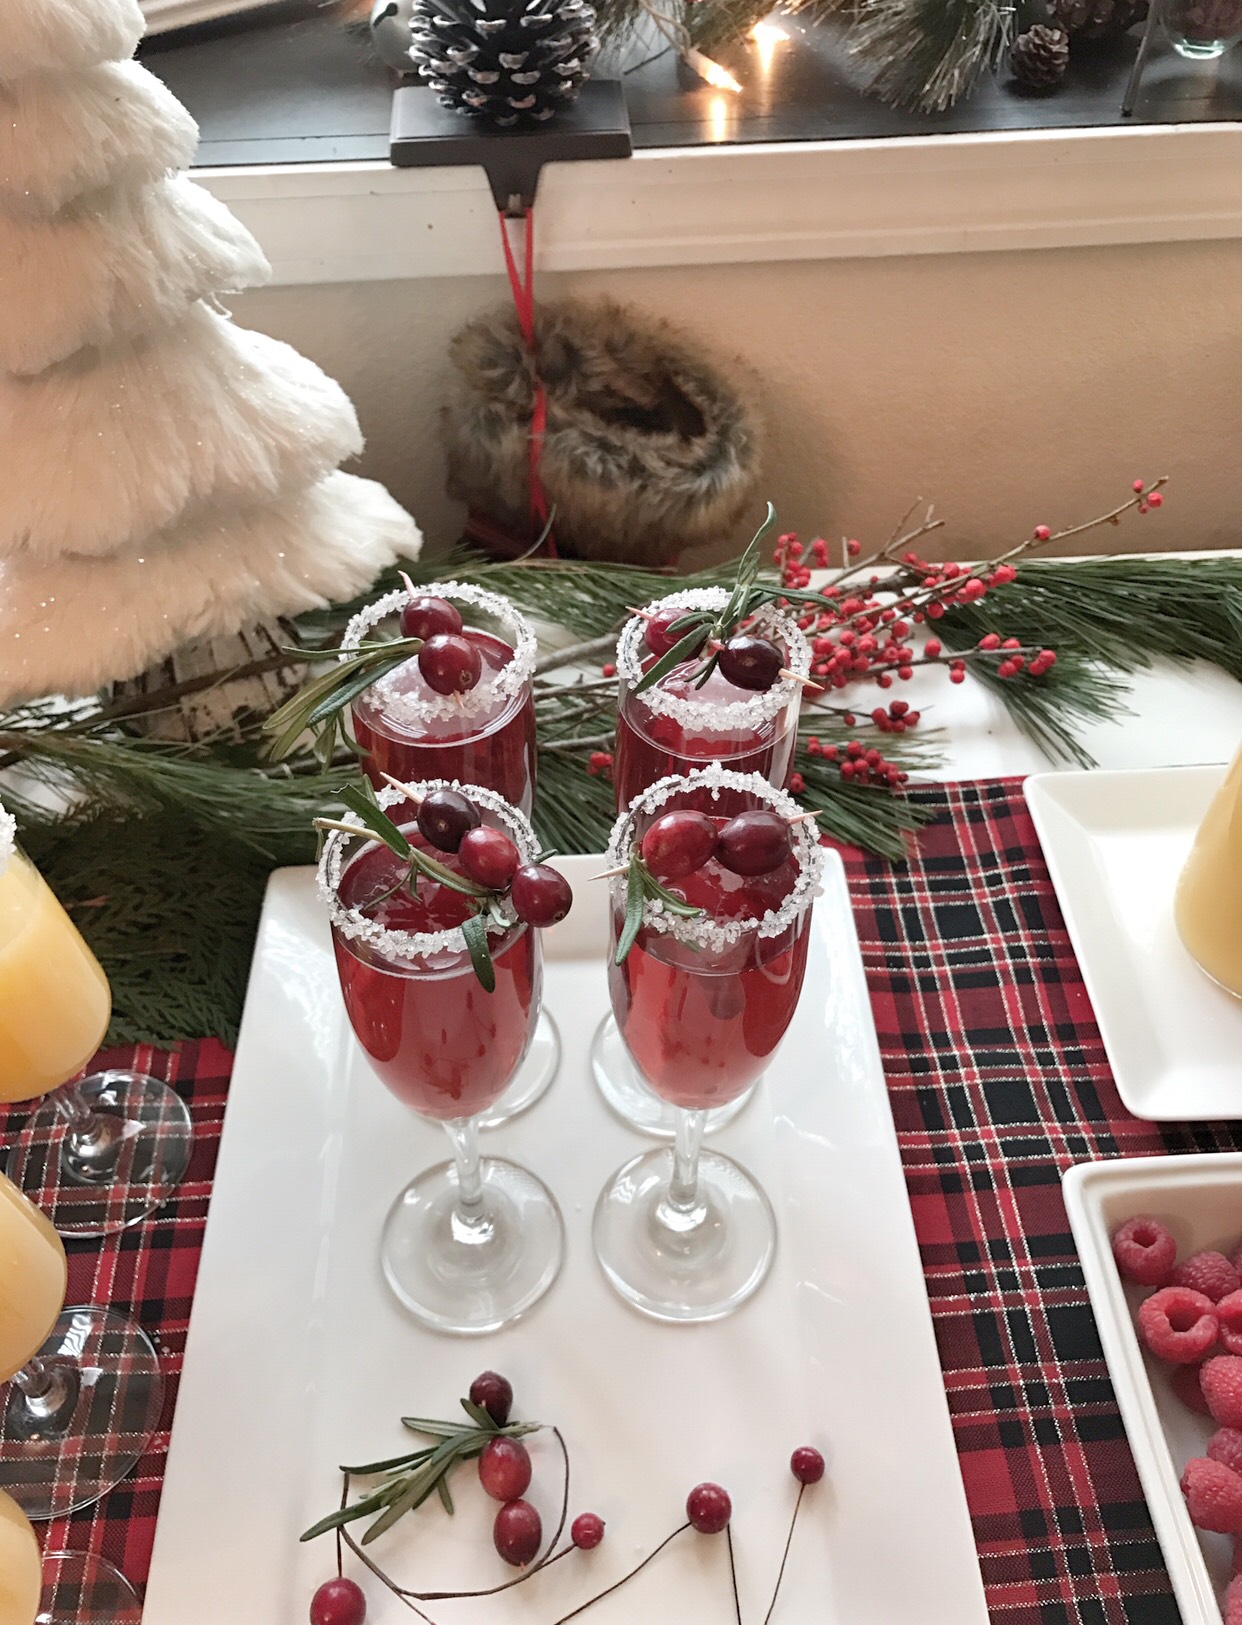 Host a Holiday Party with a Christmas Cranberry Mimosas